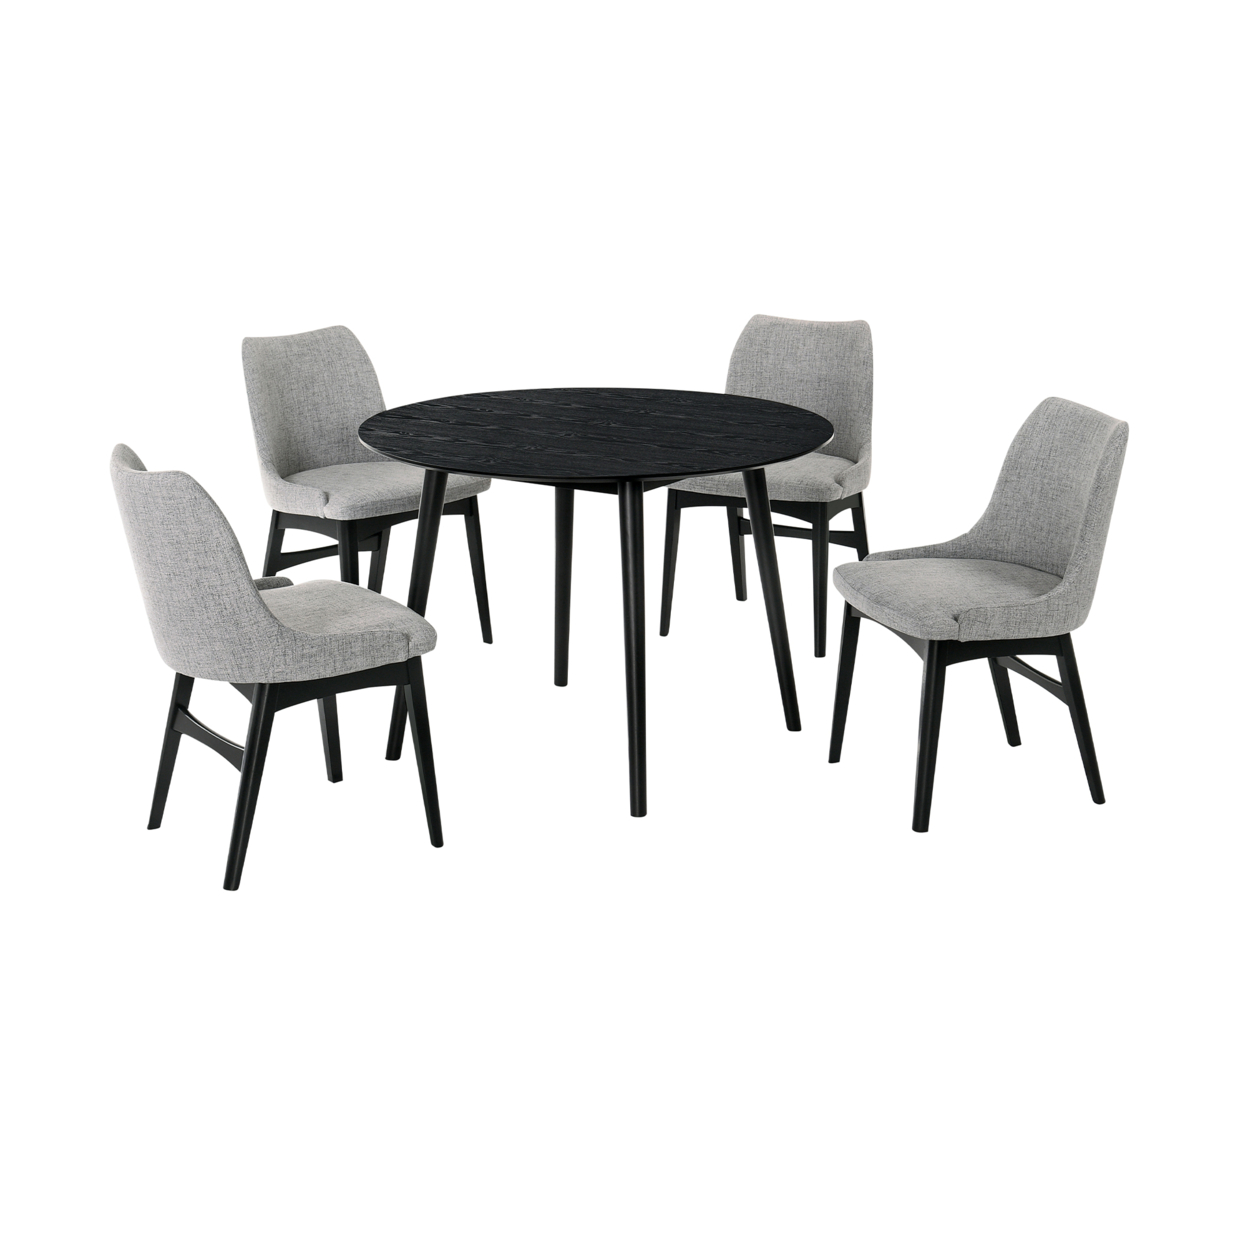 5 Piece Dining Set With Countered Fabric Side Chair, Black And Gray- Saltoro Sherpi